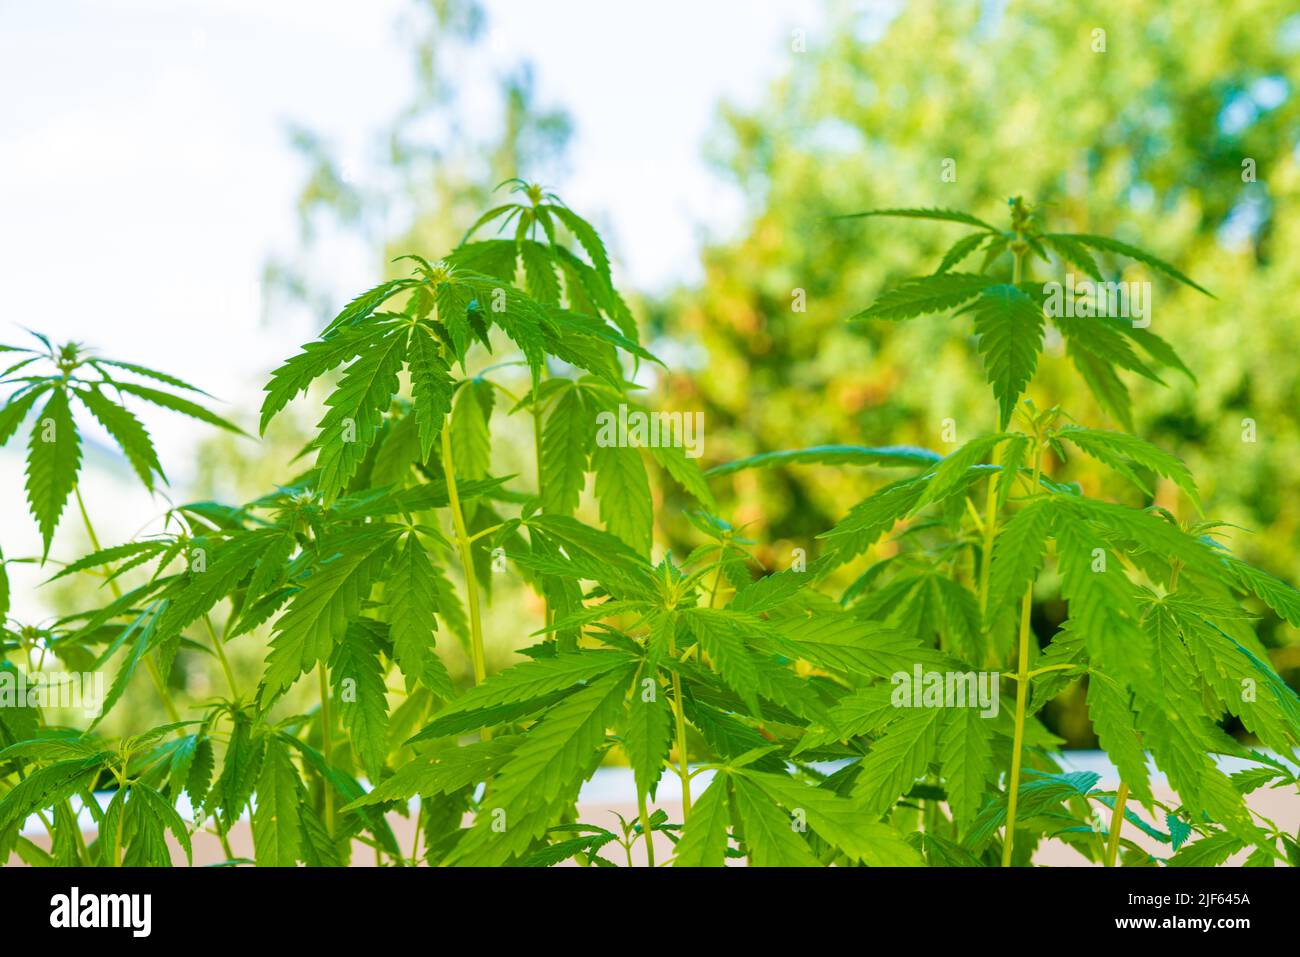 Medicinal hemp bushes in an industrial greenhouse. Commercial Growth Of Cannabis Stock Photo